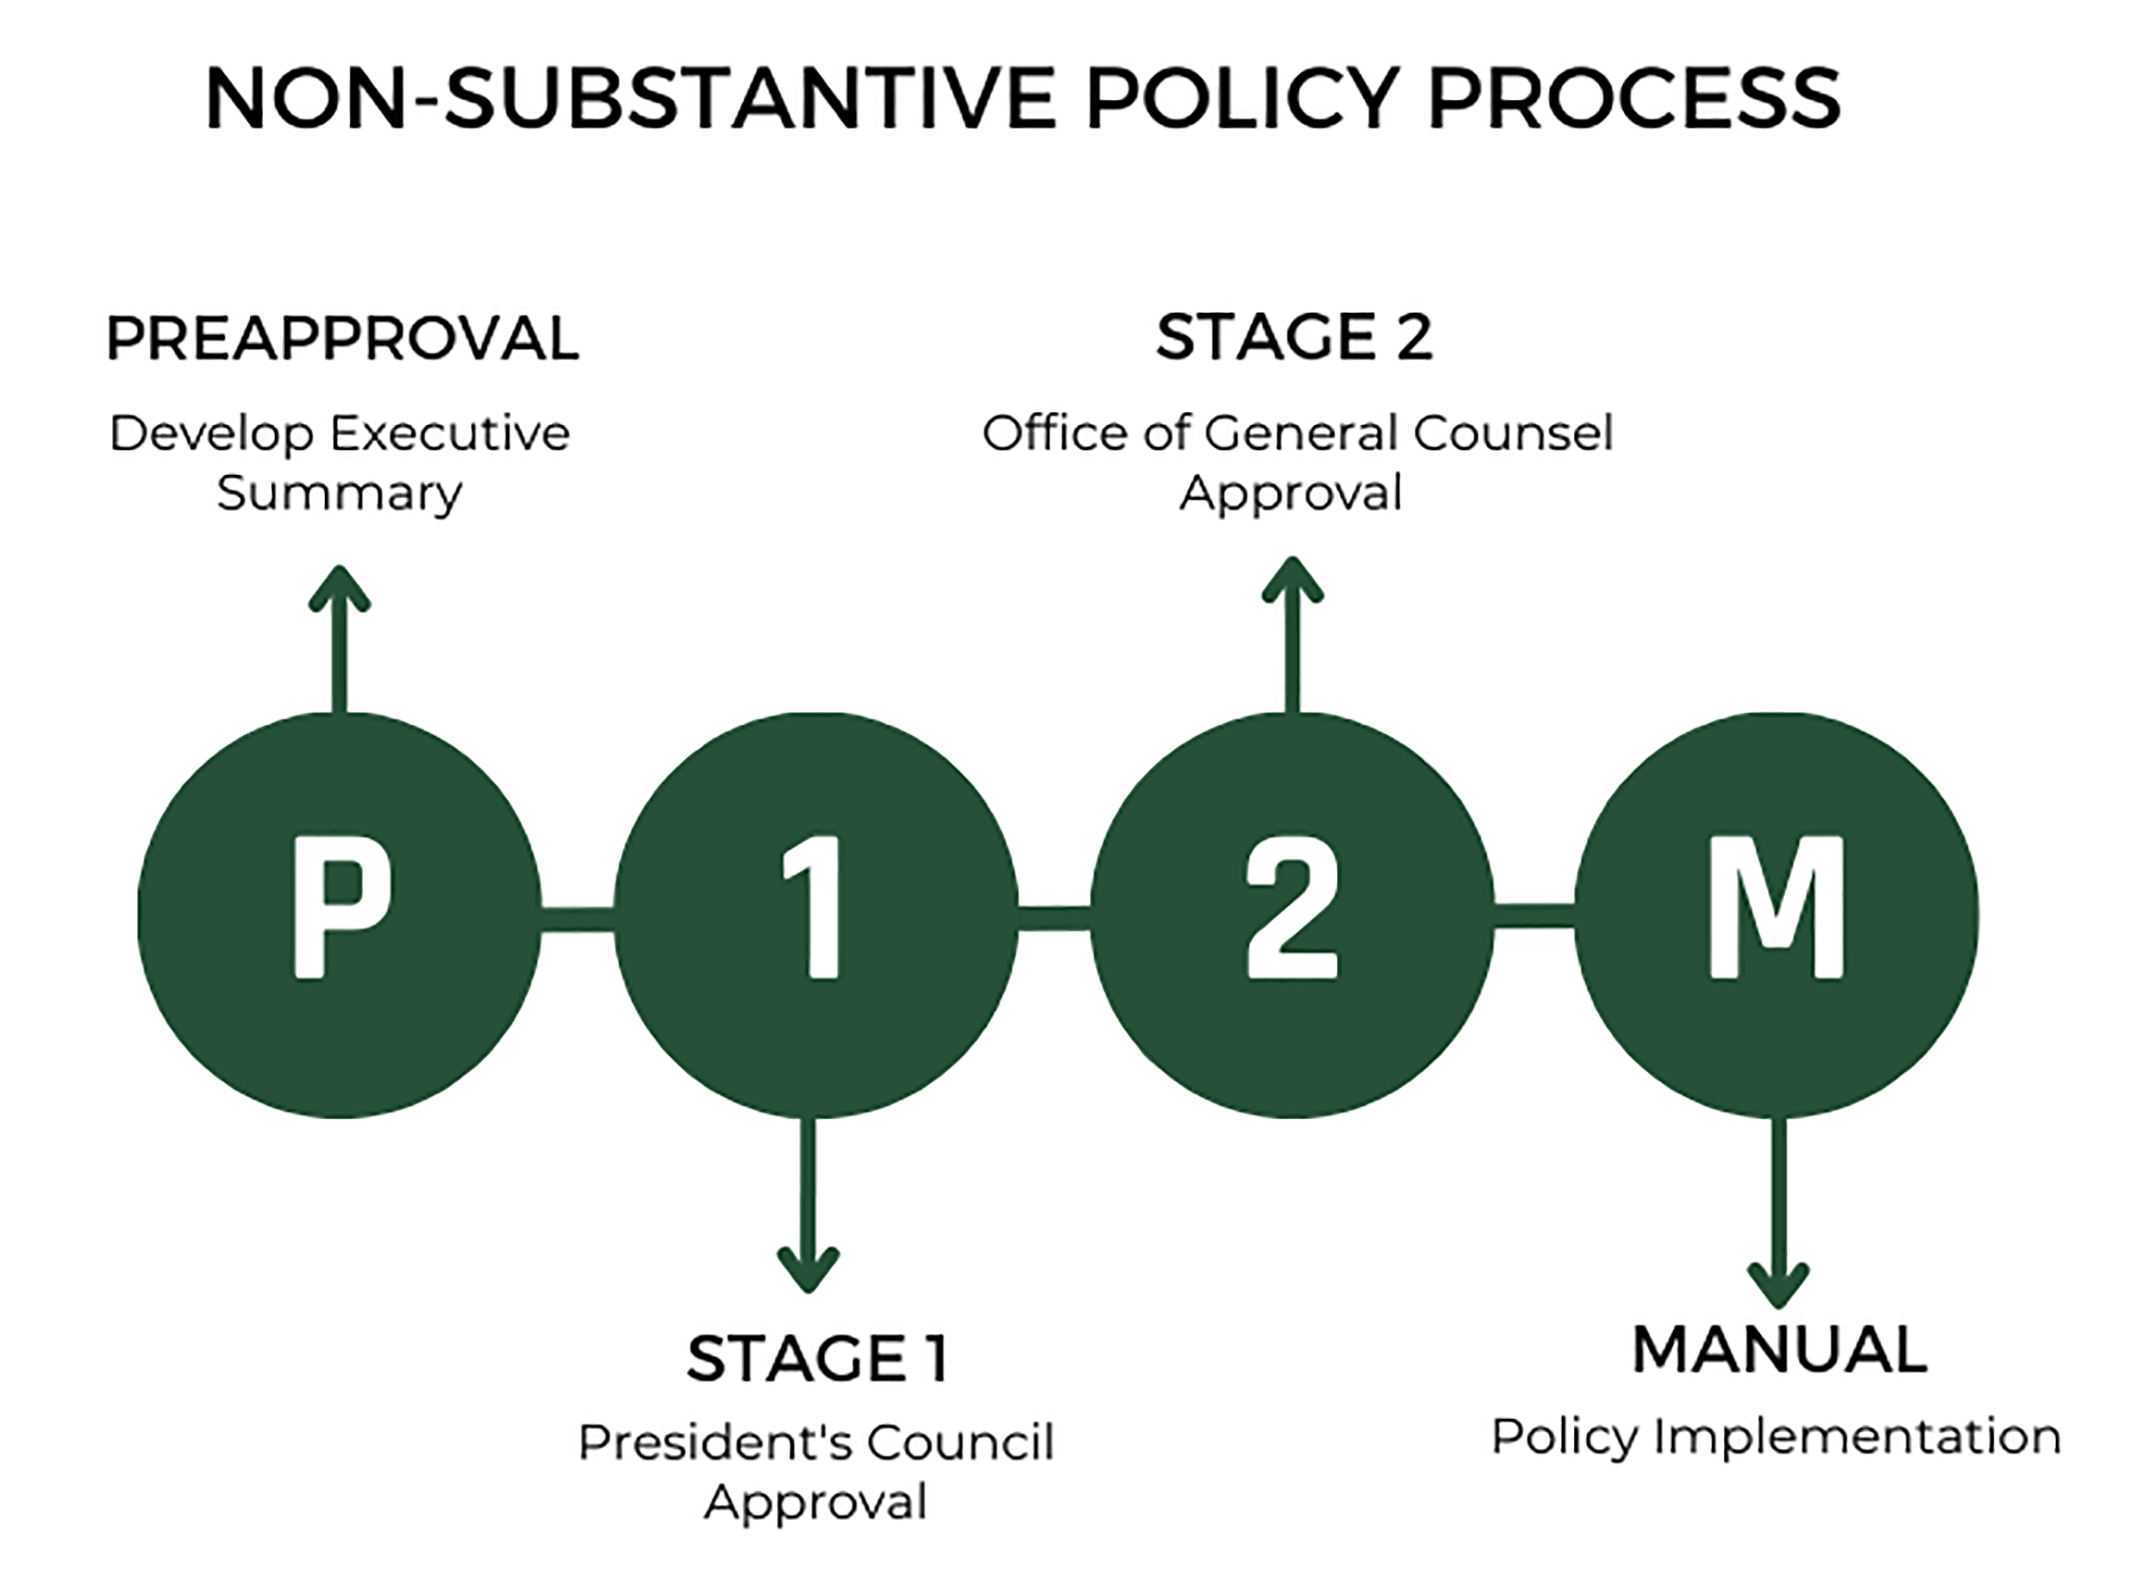 A graphic overviewing the non-substantive process. The steps include preapproval, stage 1, stage 2, and manual implementation